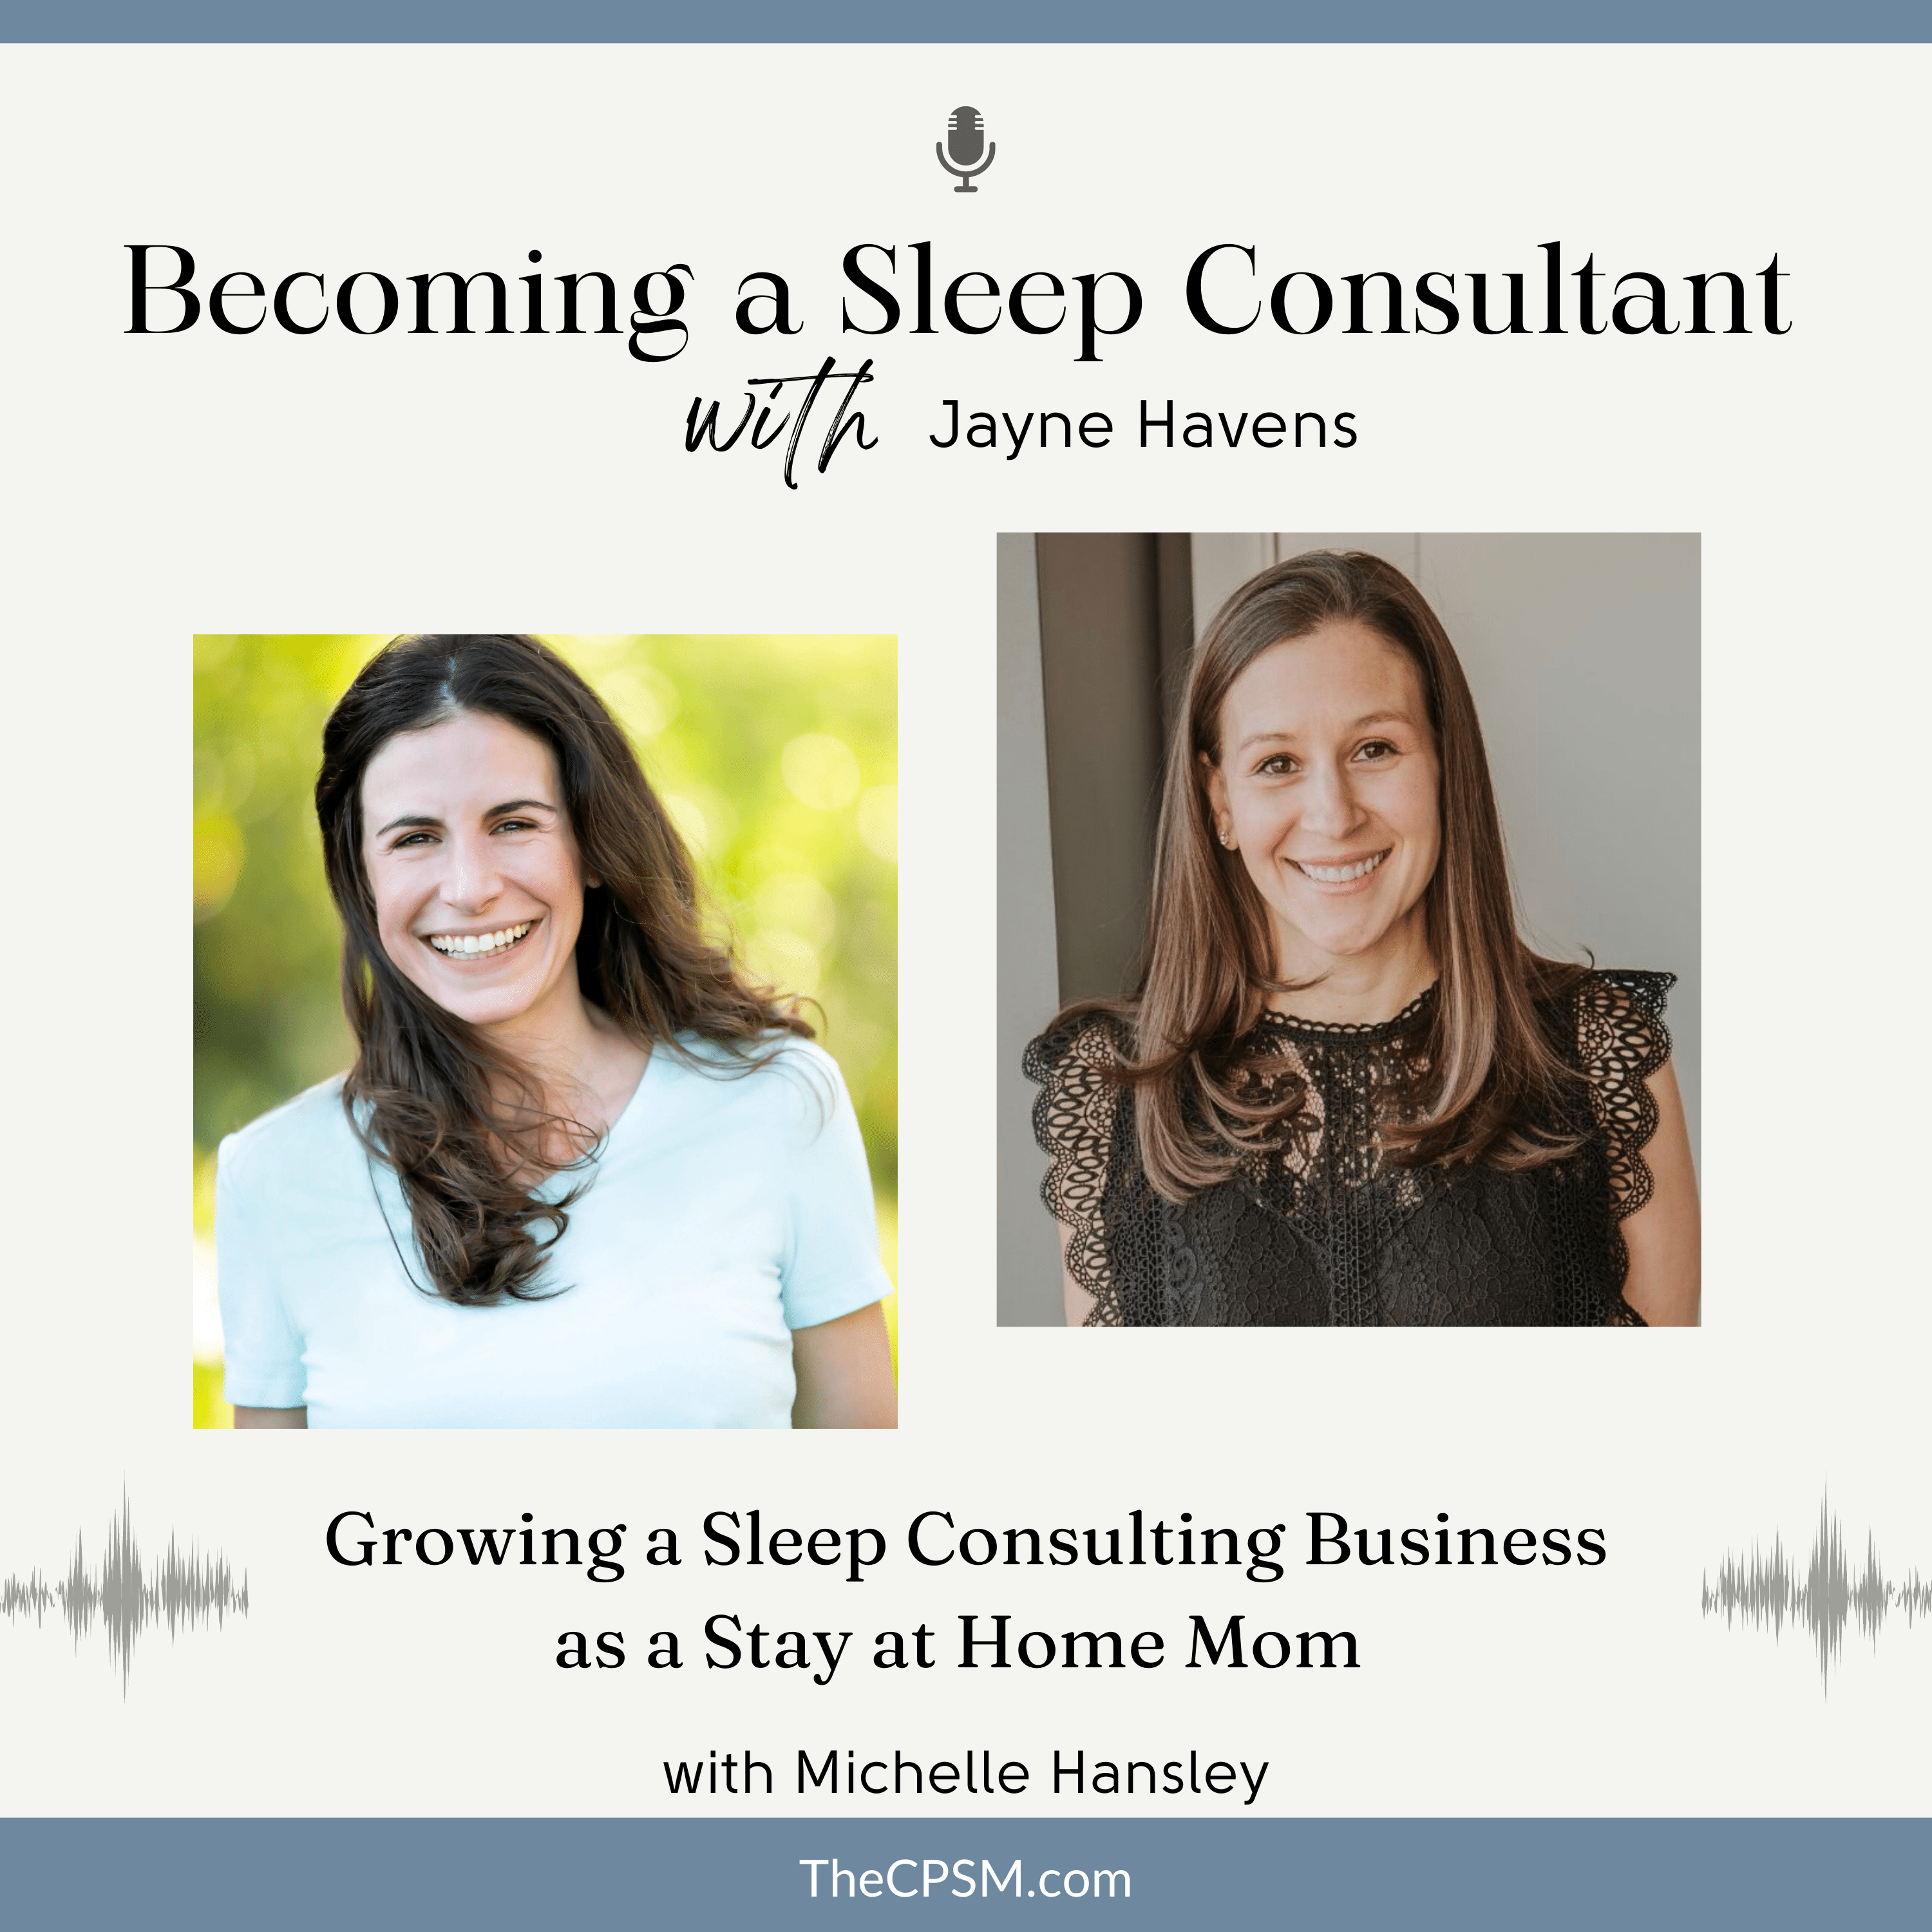 Growing a Sleep Consulting Business as a Stay at Home Mom with Michelle Hansley